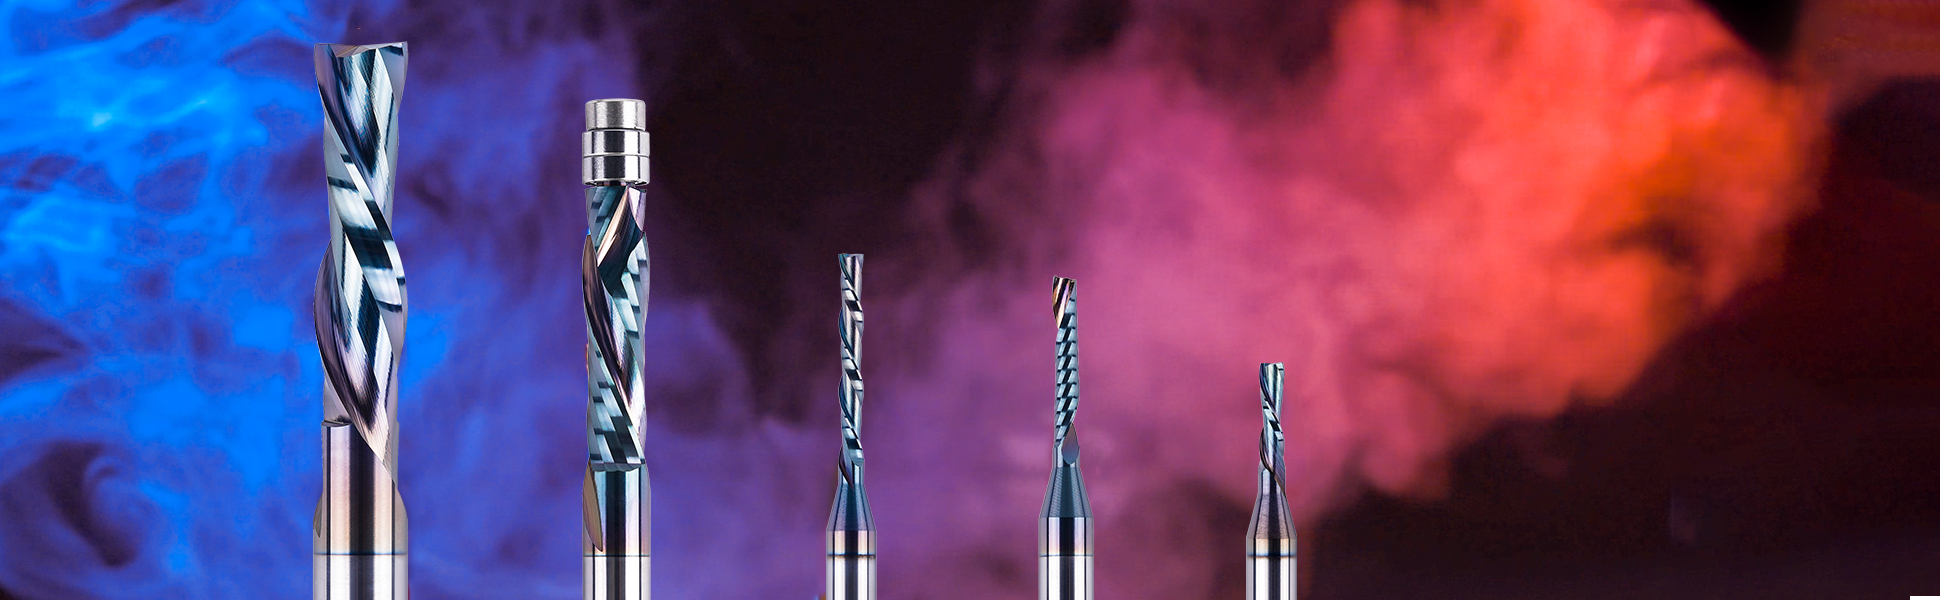 SpeTool Launches New Range of Solid Carbide End Mills for Enhanced Precision and Performance